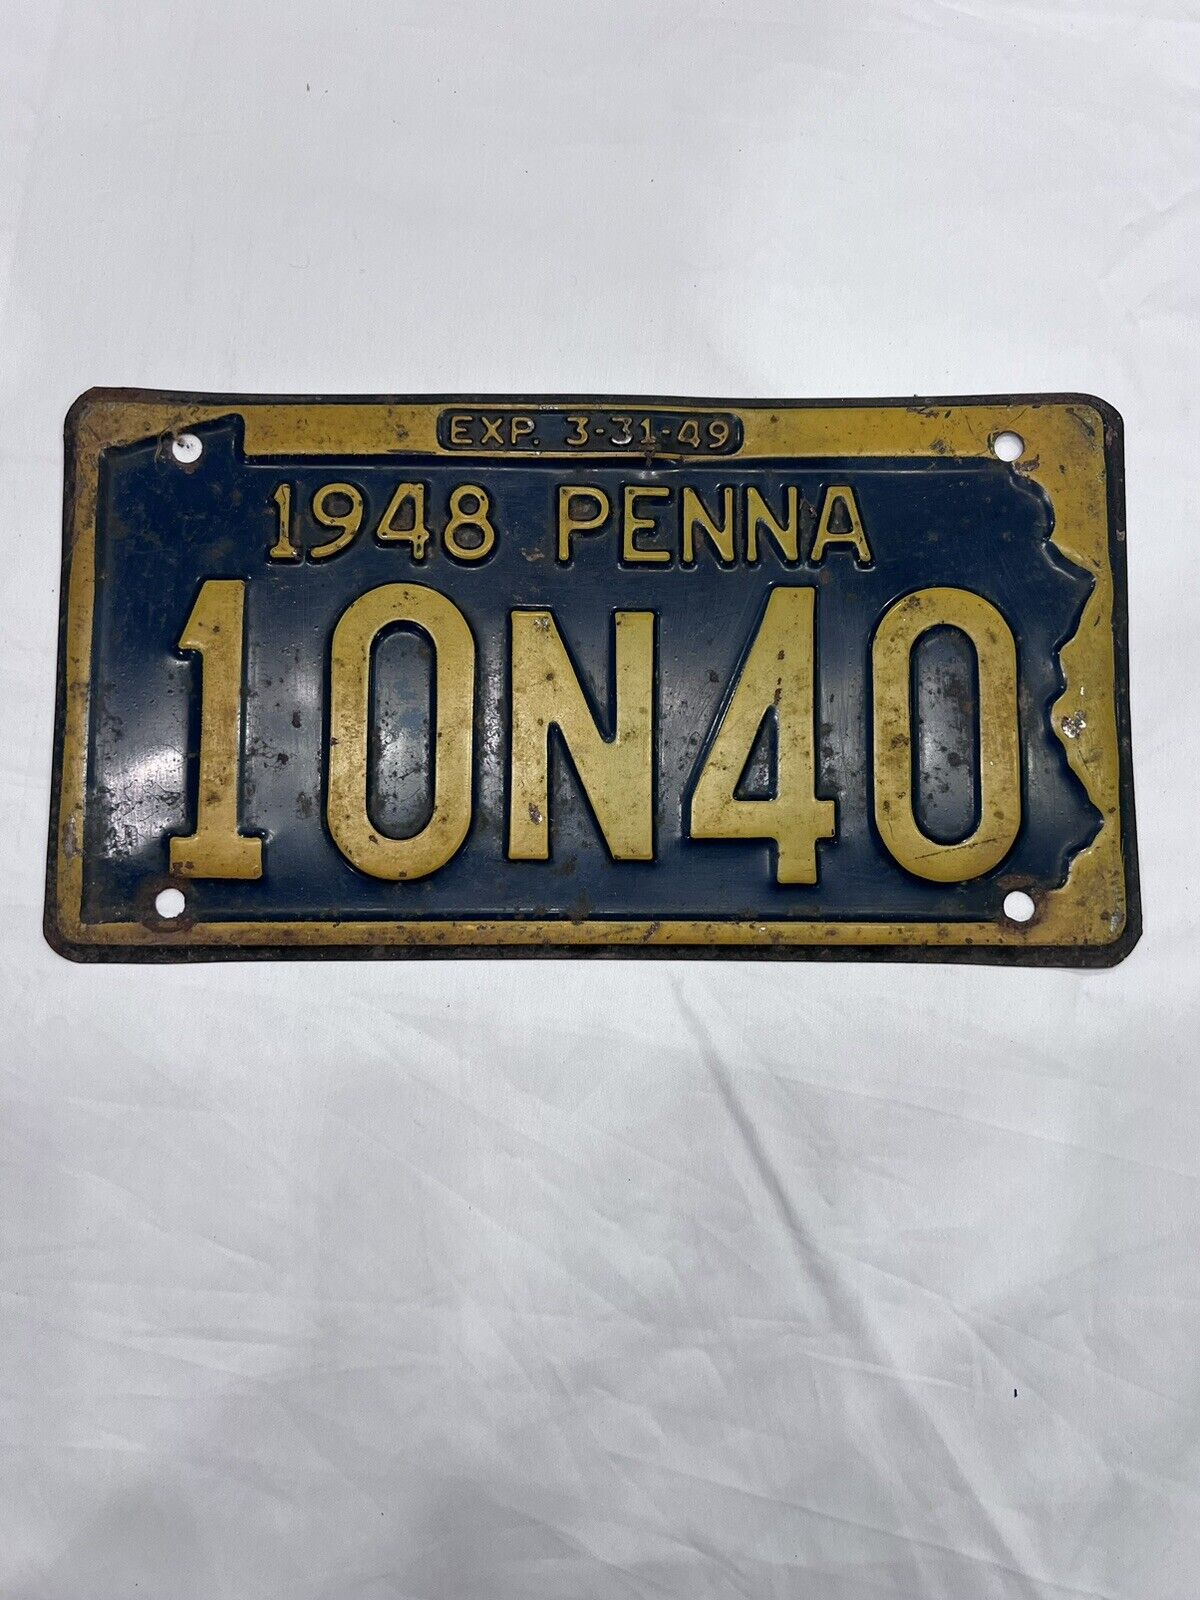 Vintage 1948 PENNSYLVANIA, PENNA, PA, License Plate 85B61 Blue Plate Yellow Text